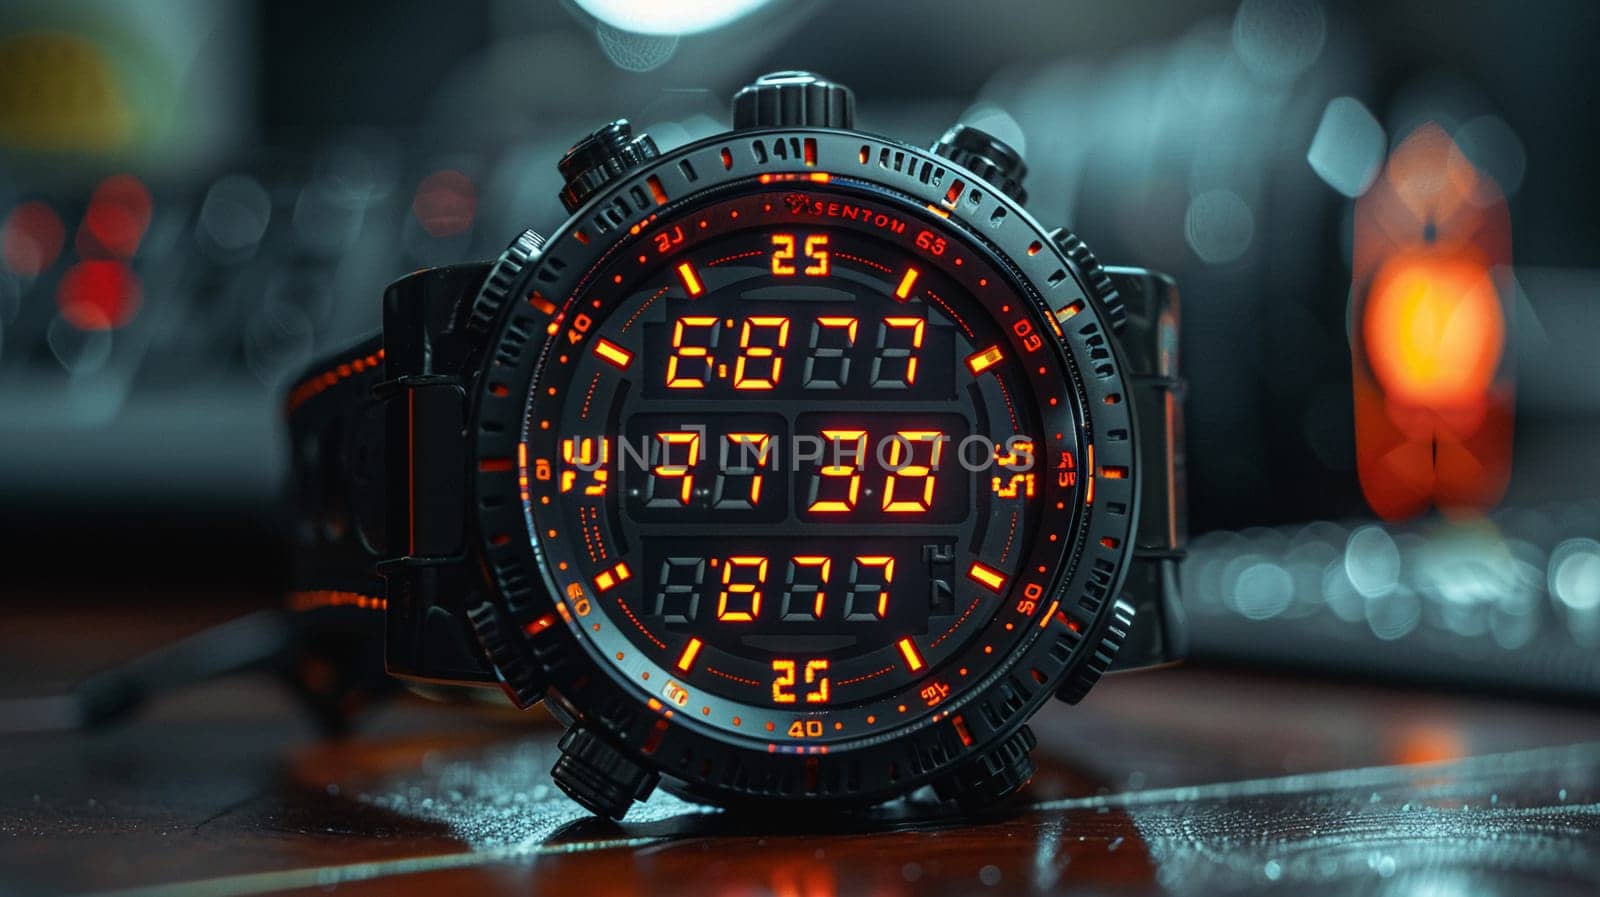 Retro Digital Watch Face with Pixelated Time Display The numbers blur into digital segments by Benzoix